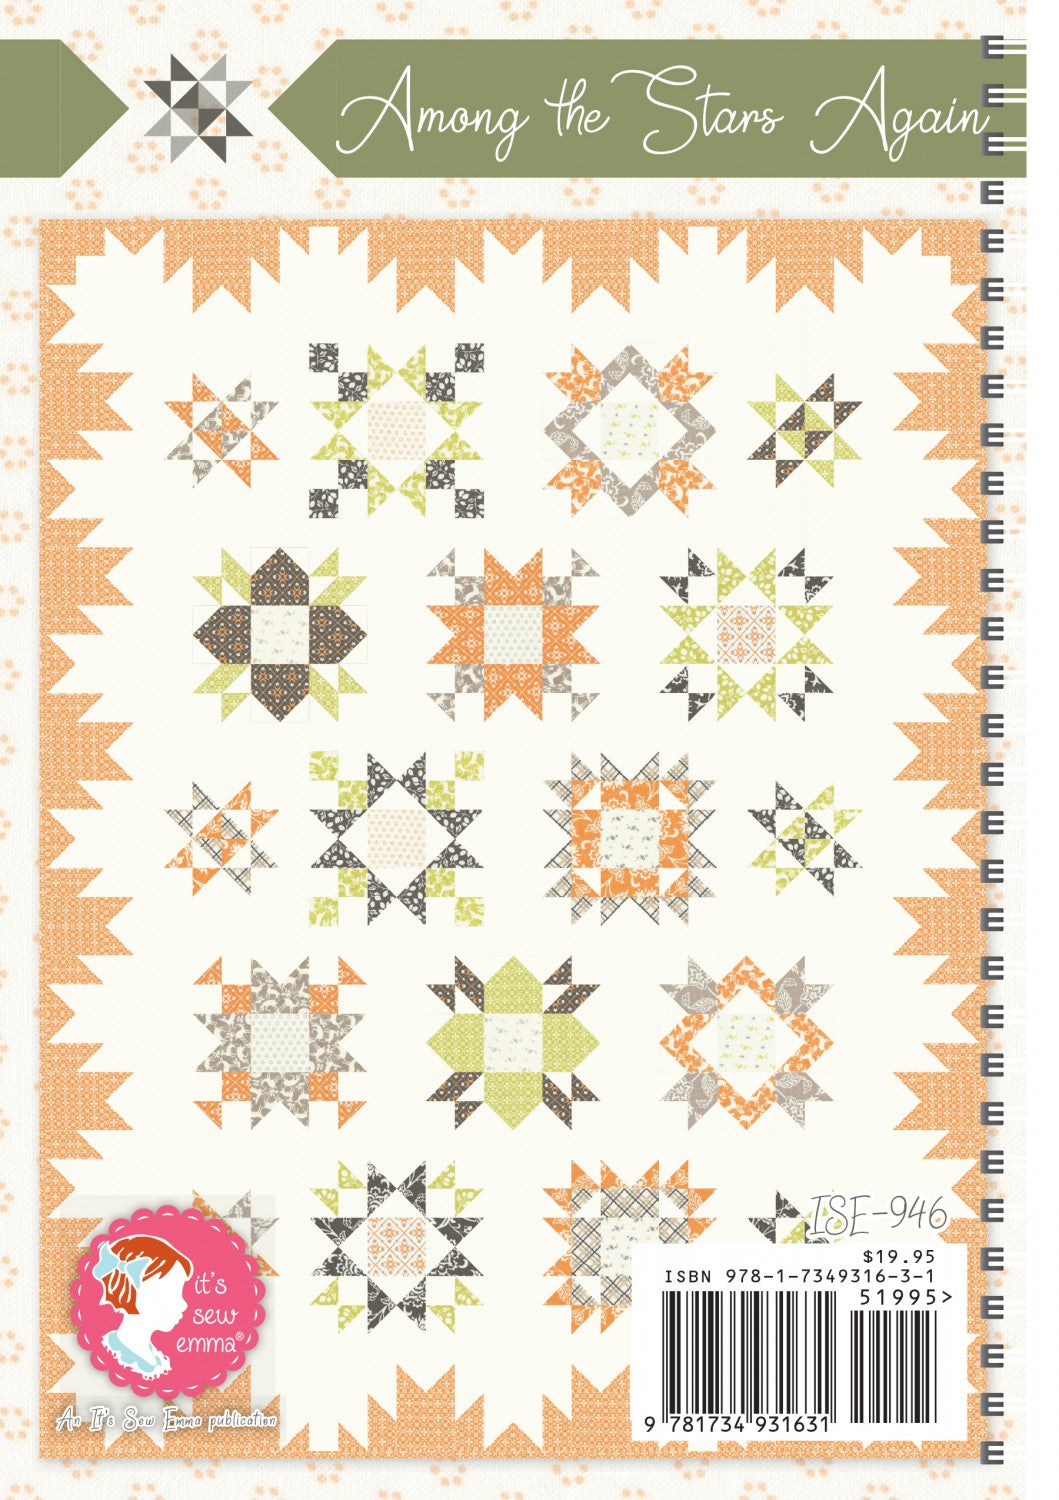 Among The Stars Again Quilt Pattern Book by Joanna Figueroa for It's Sew Emma